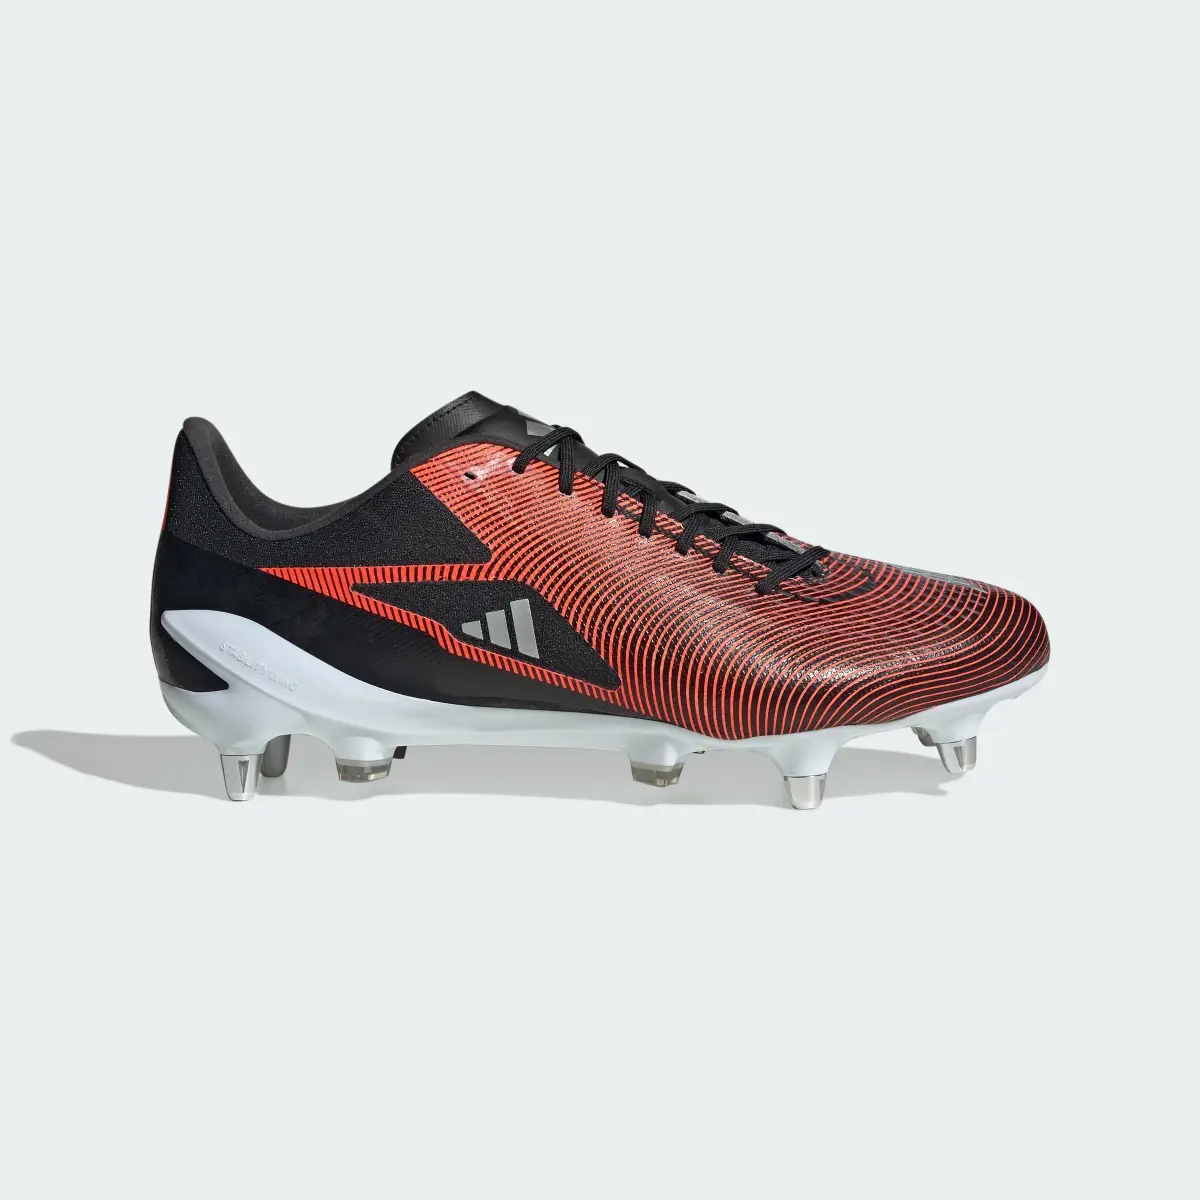 Adidas Adizero RS15 Pro Soft Ground Rugby Boots. 2